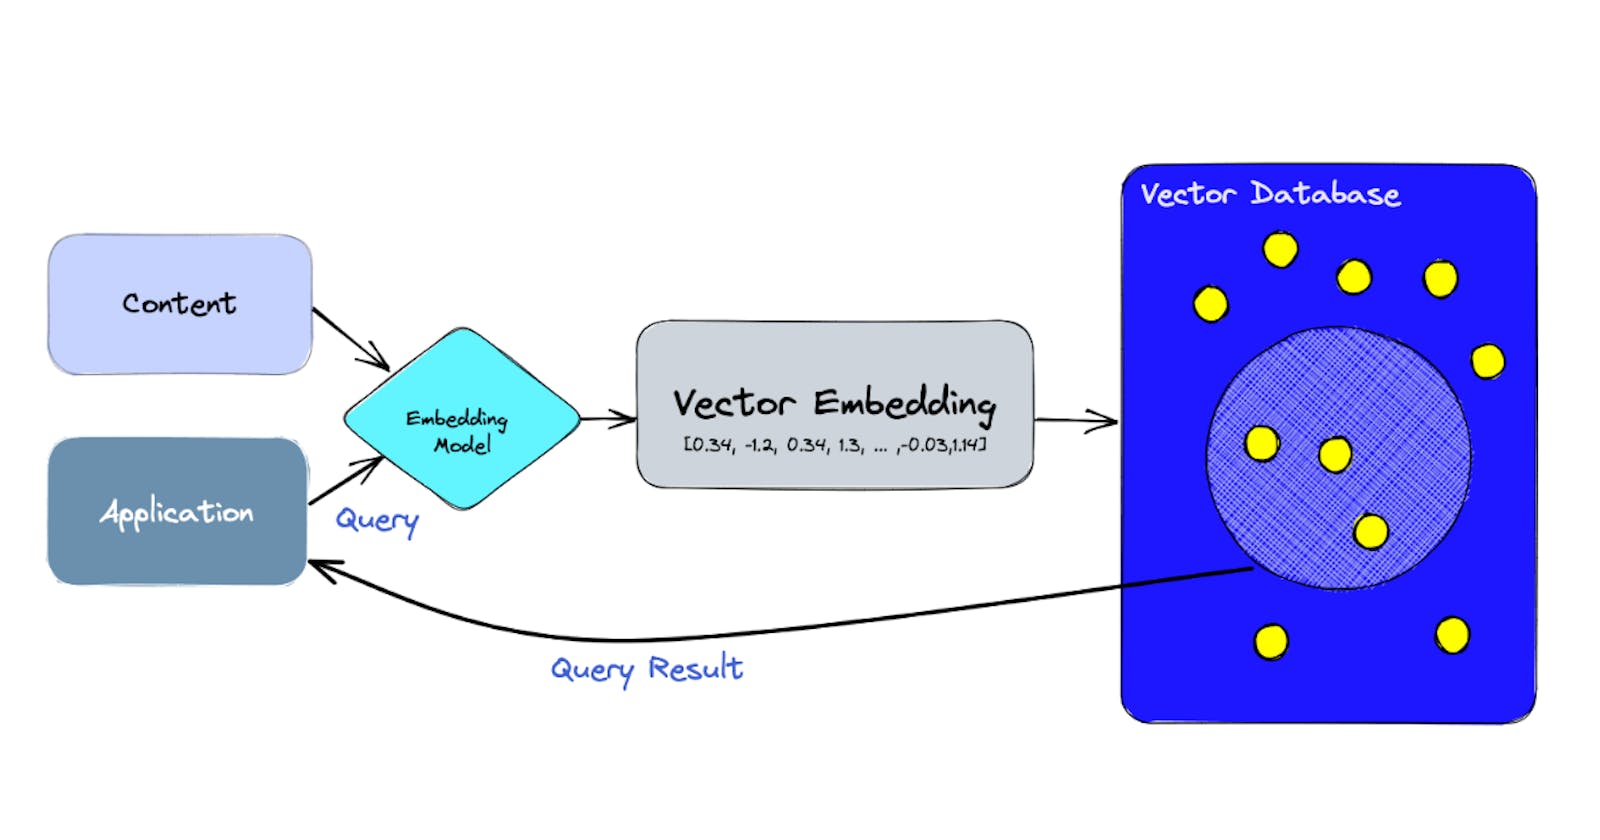 #5 Working with Vector Databases